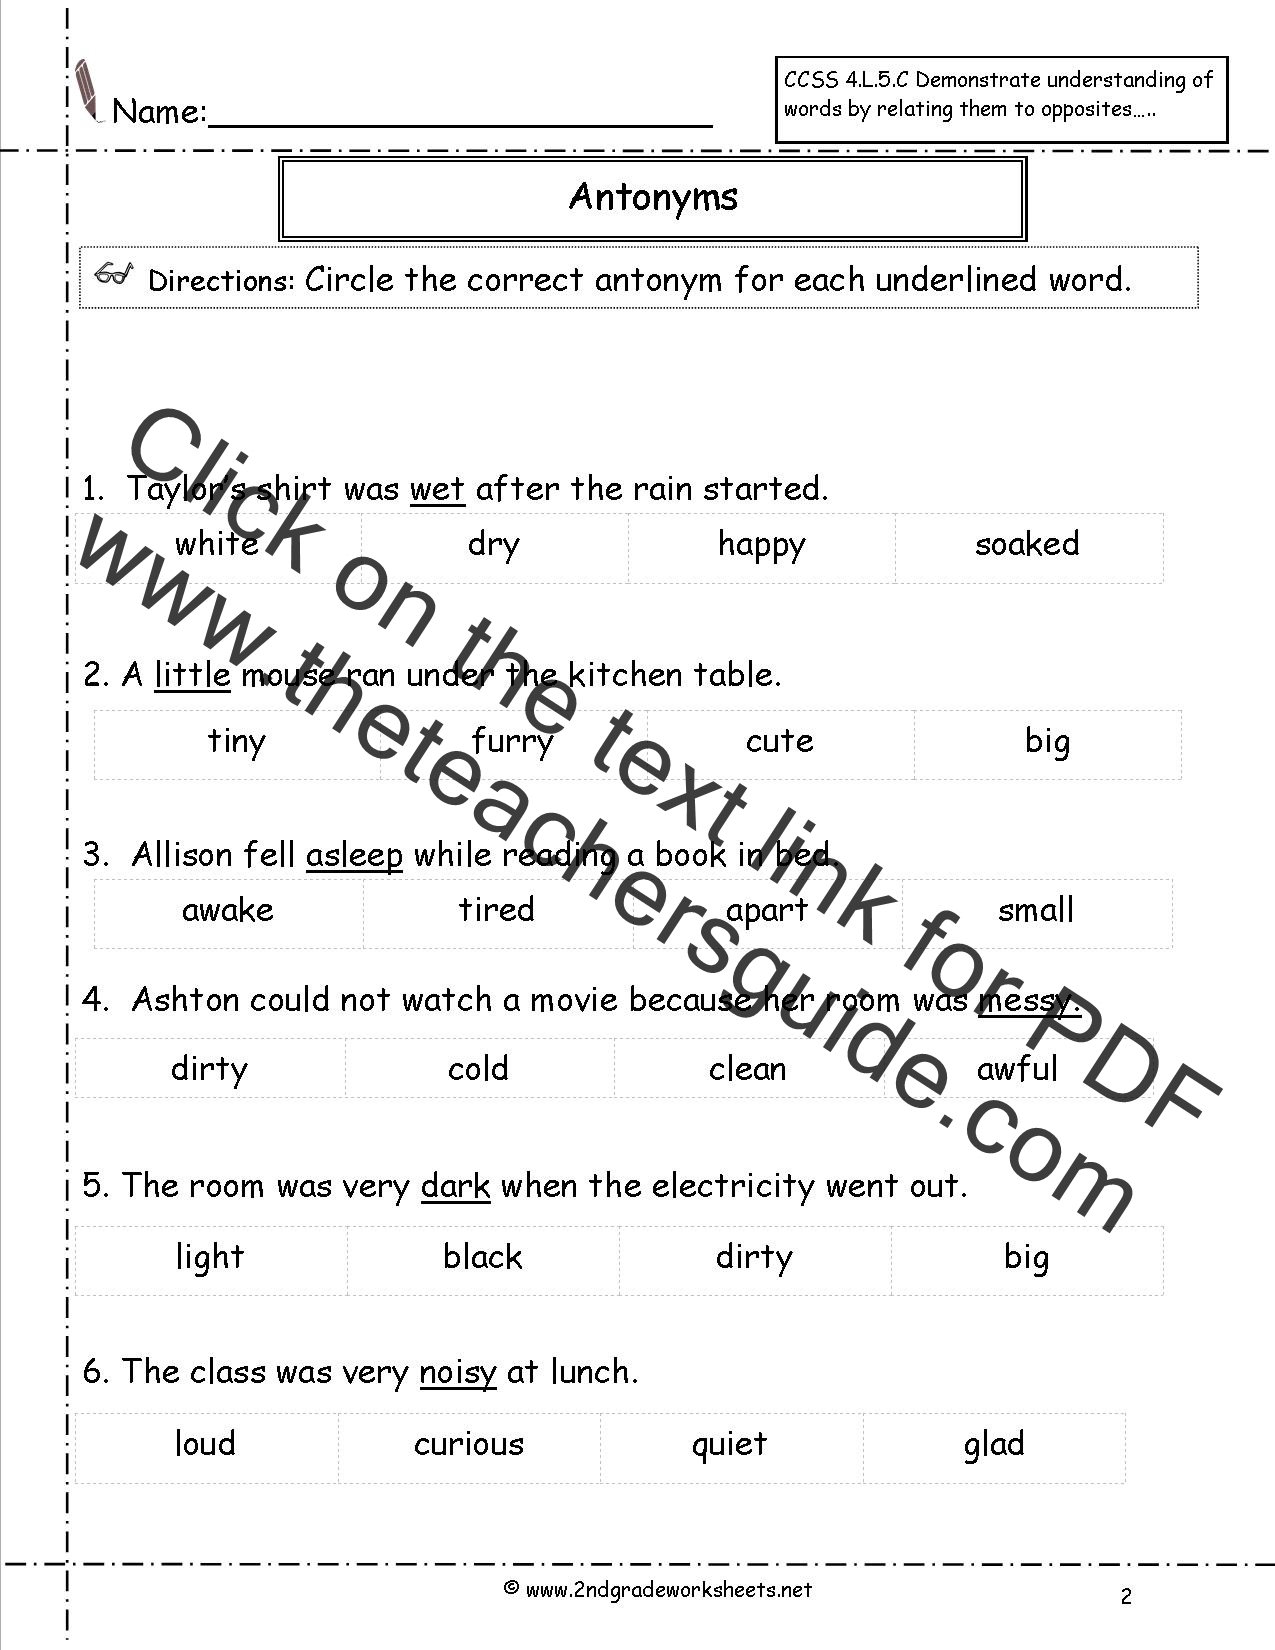 synonyms-and-antonyms-worksheets